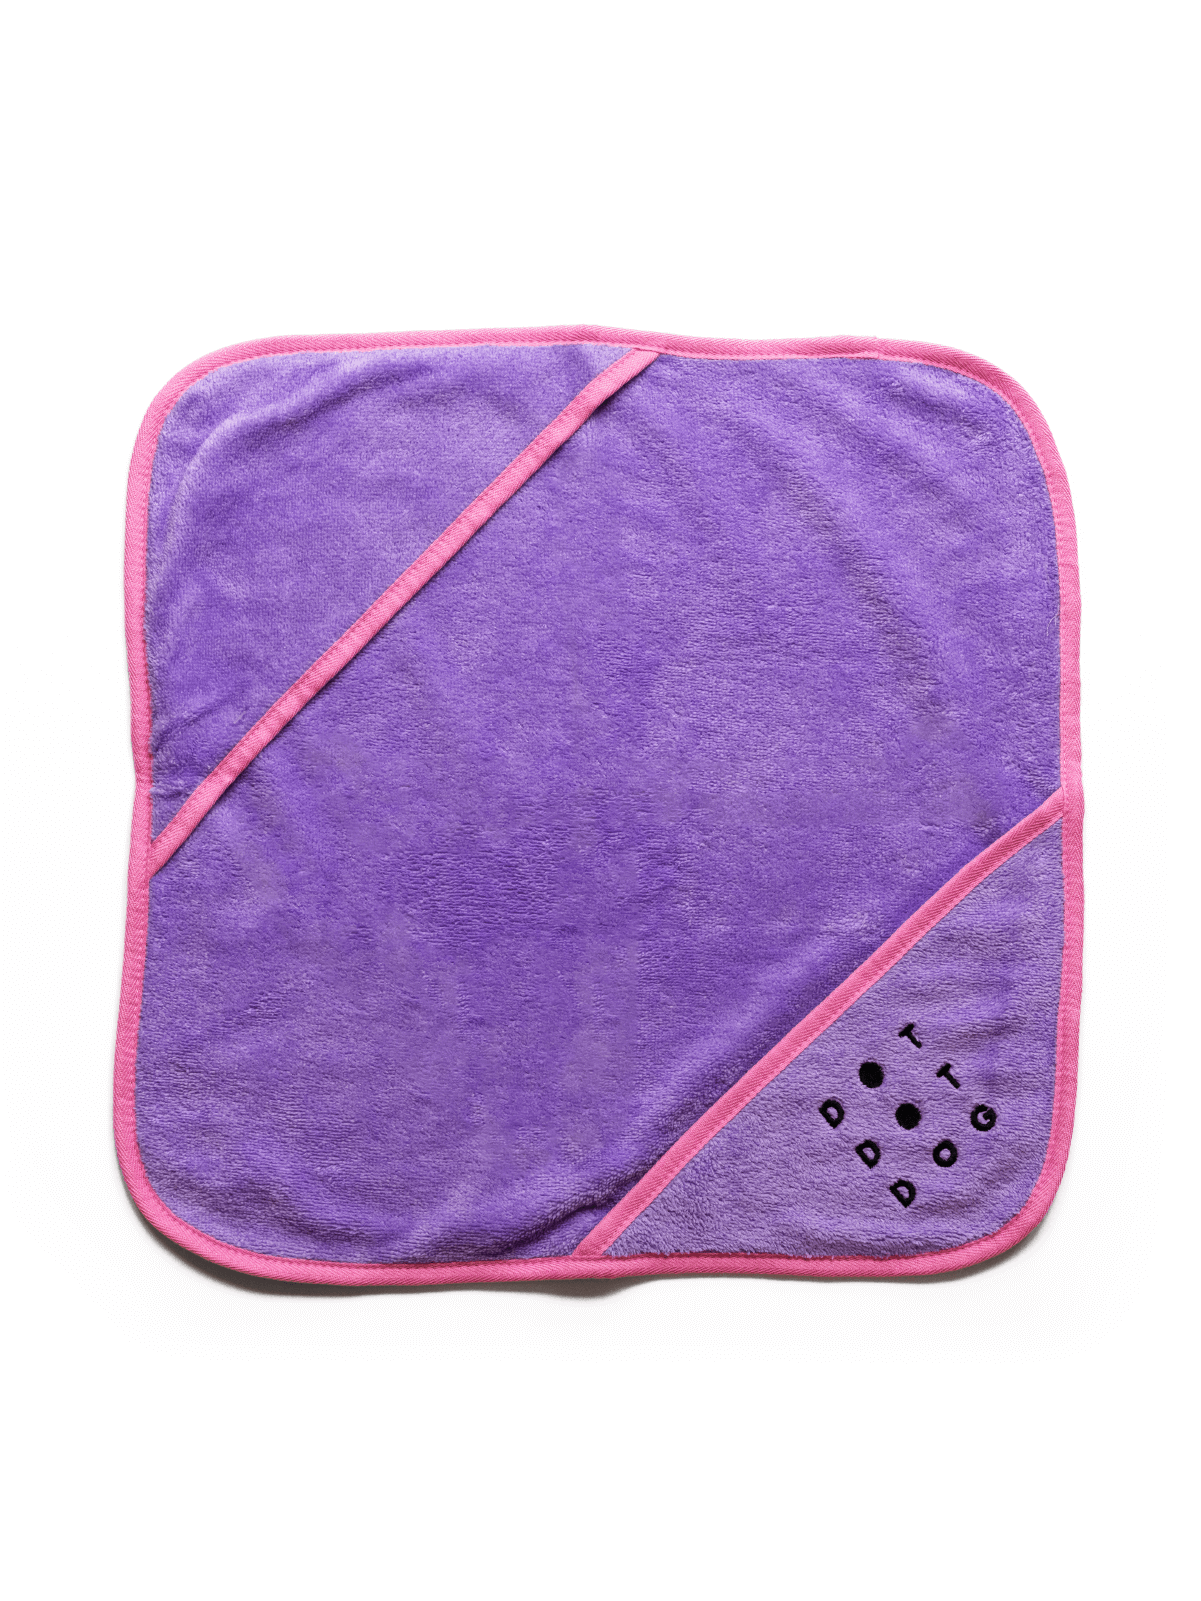 Image of the towel open showing drying pockets